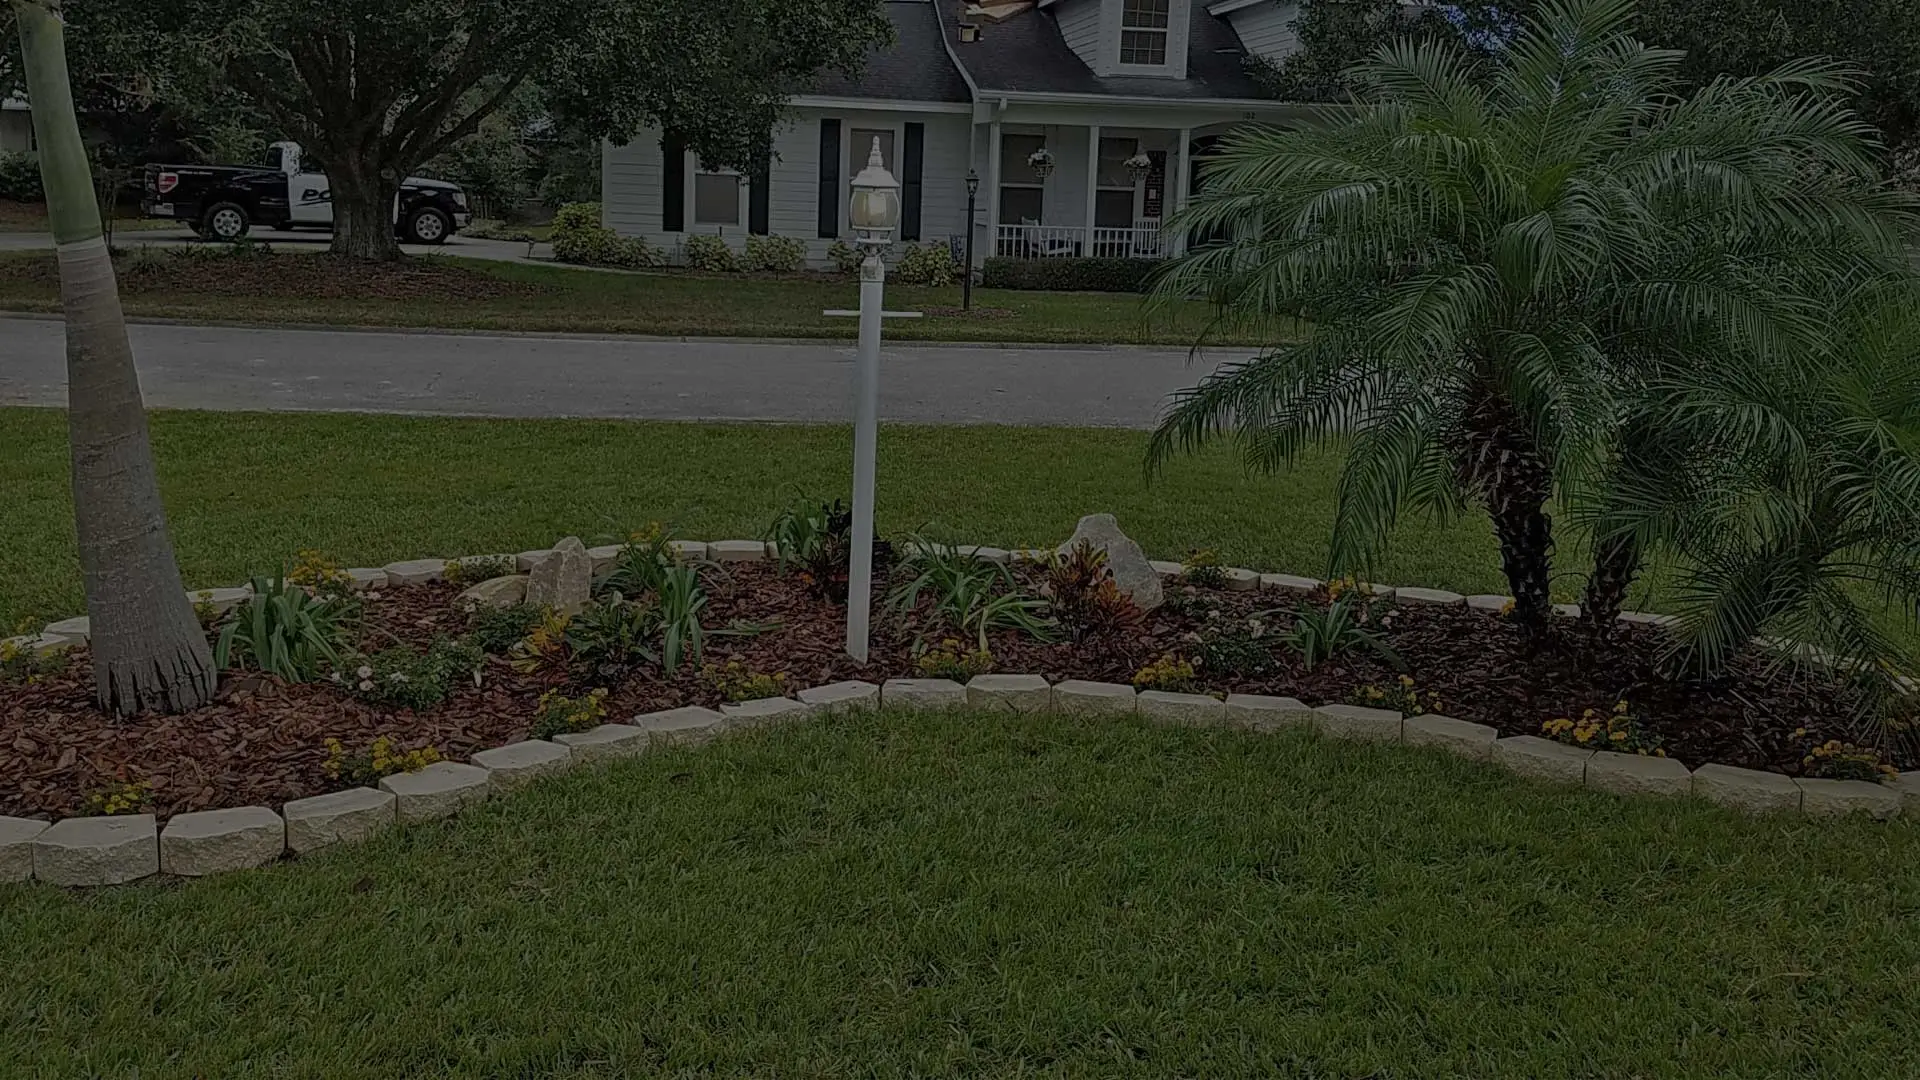 Landscaping island in front yard.